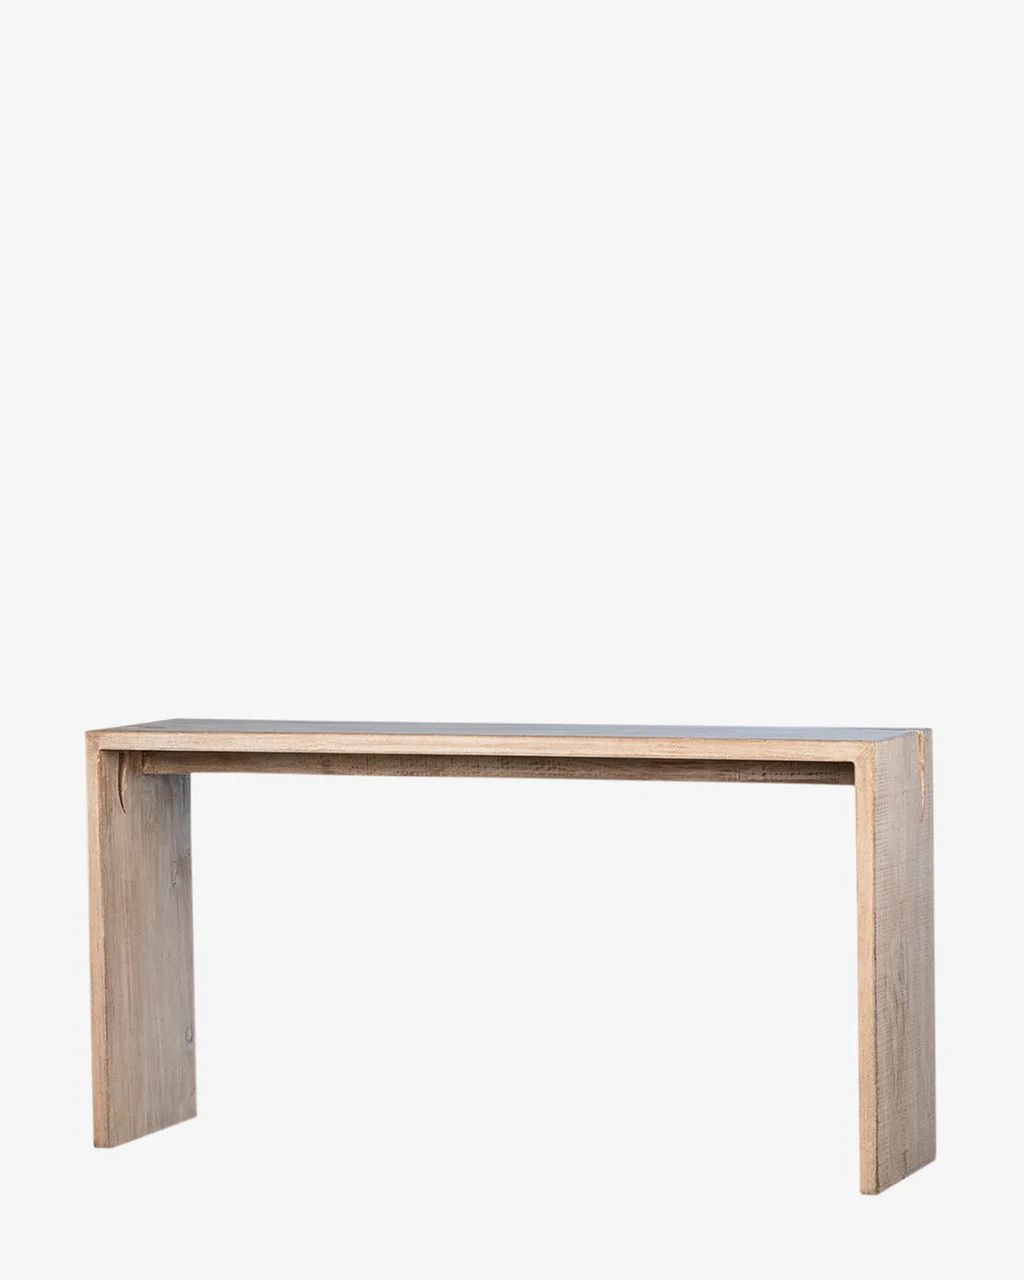 Adalee Console | McGee & Co.